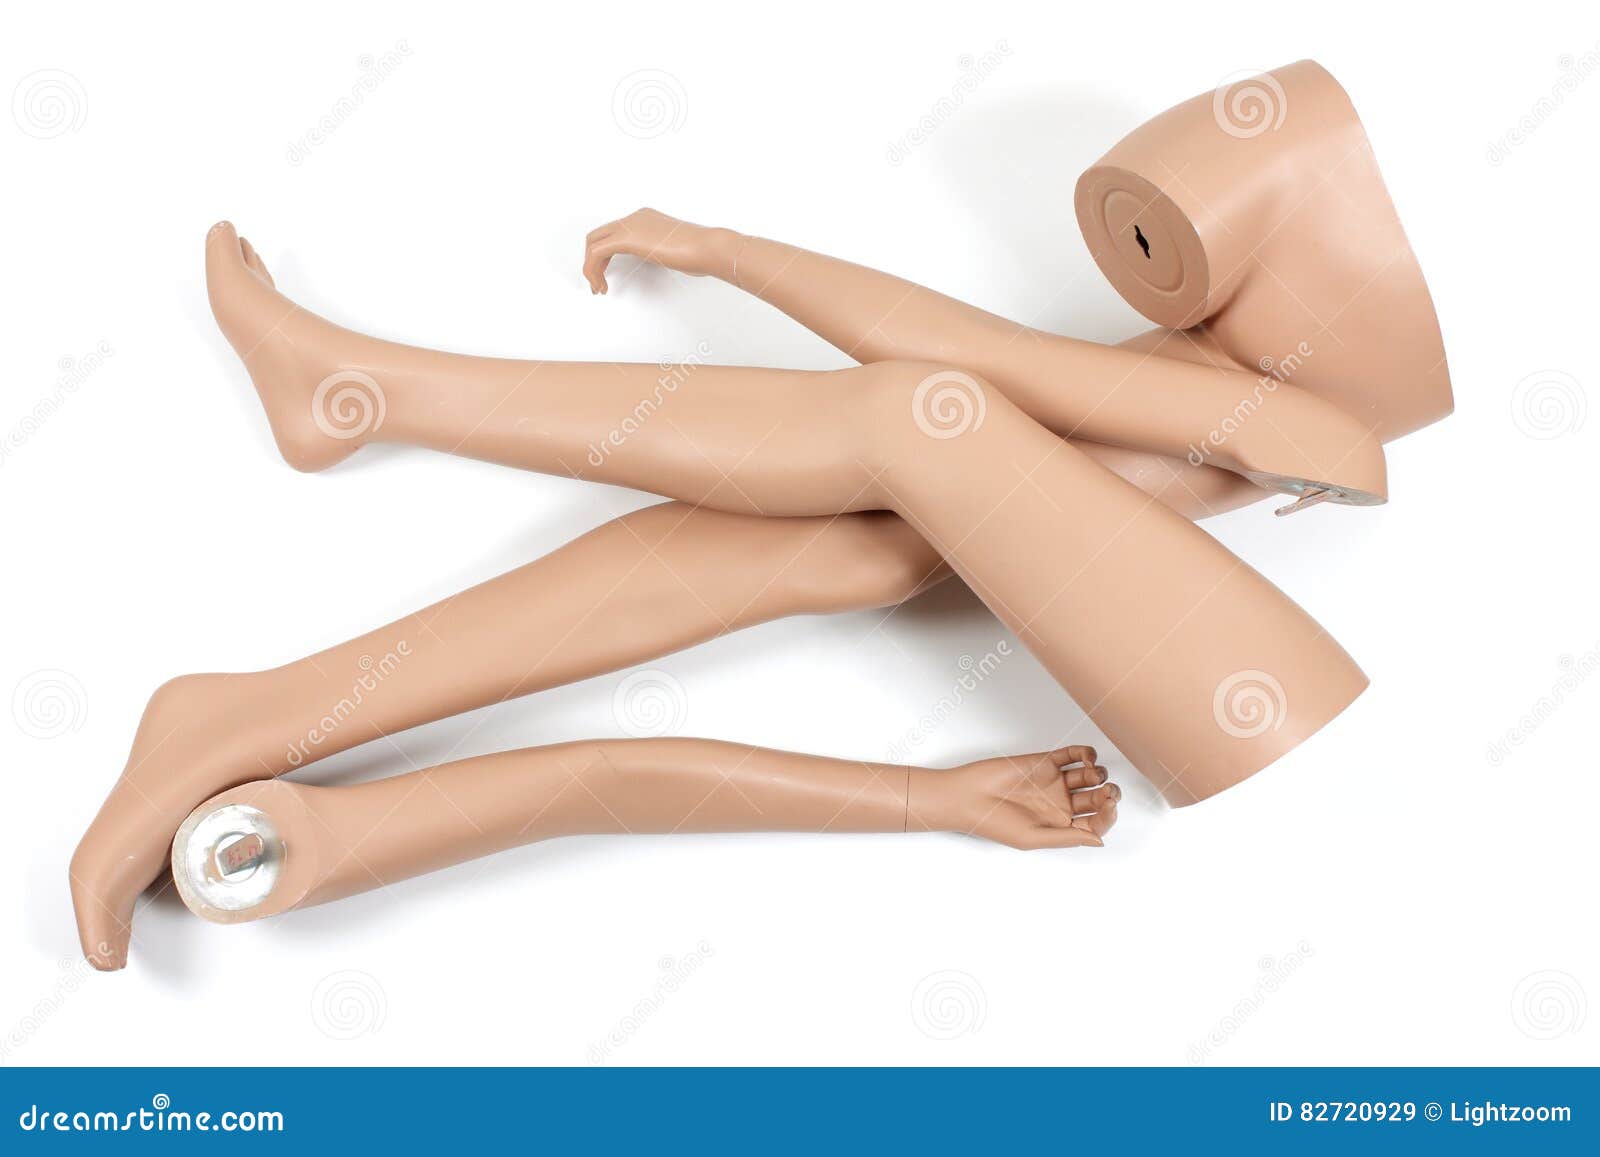 1,252 Woman Wearing Tights Socks Images, Stock Photos, 3D objects